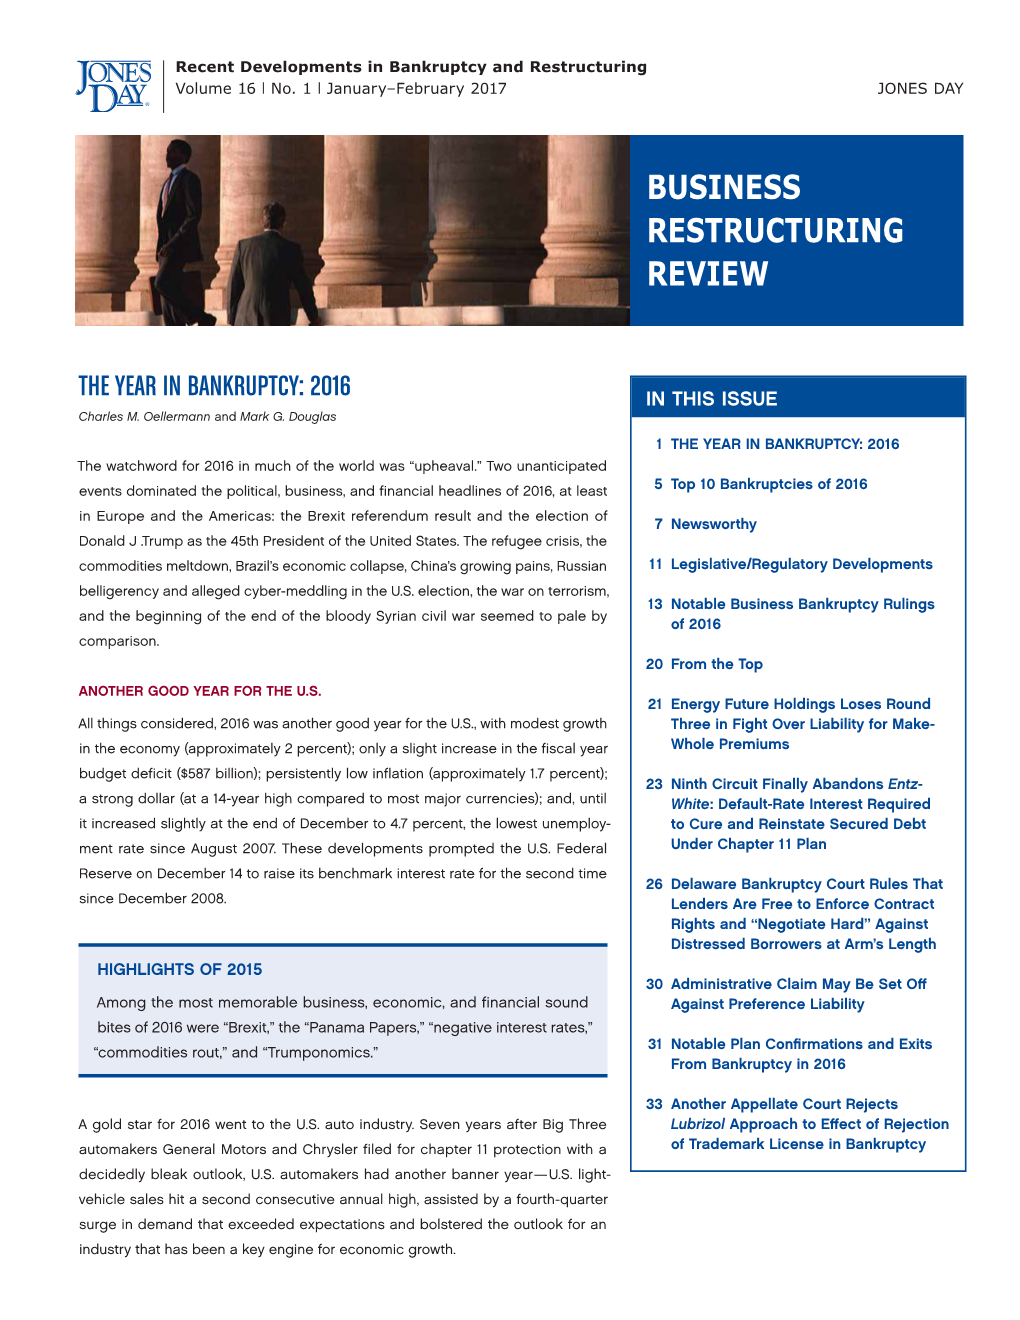 Business Restructuring Review